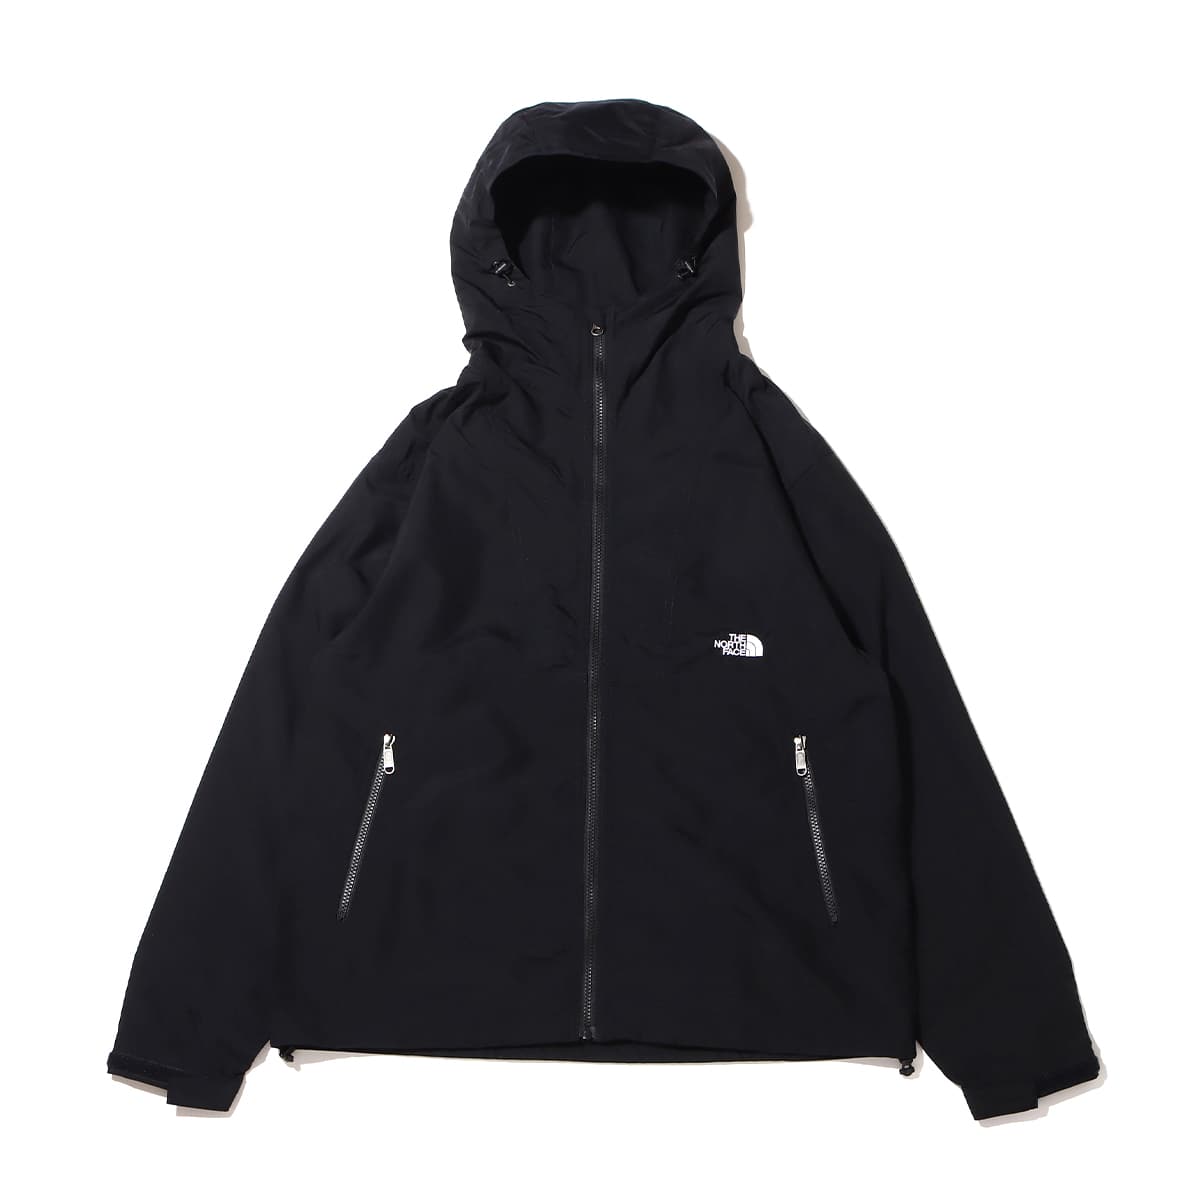 THE NORTH FACE COMPACT JACKET ブラック 24SS-I